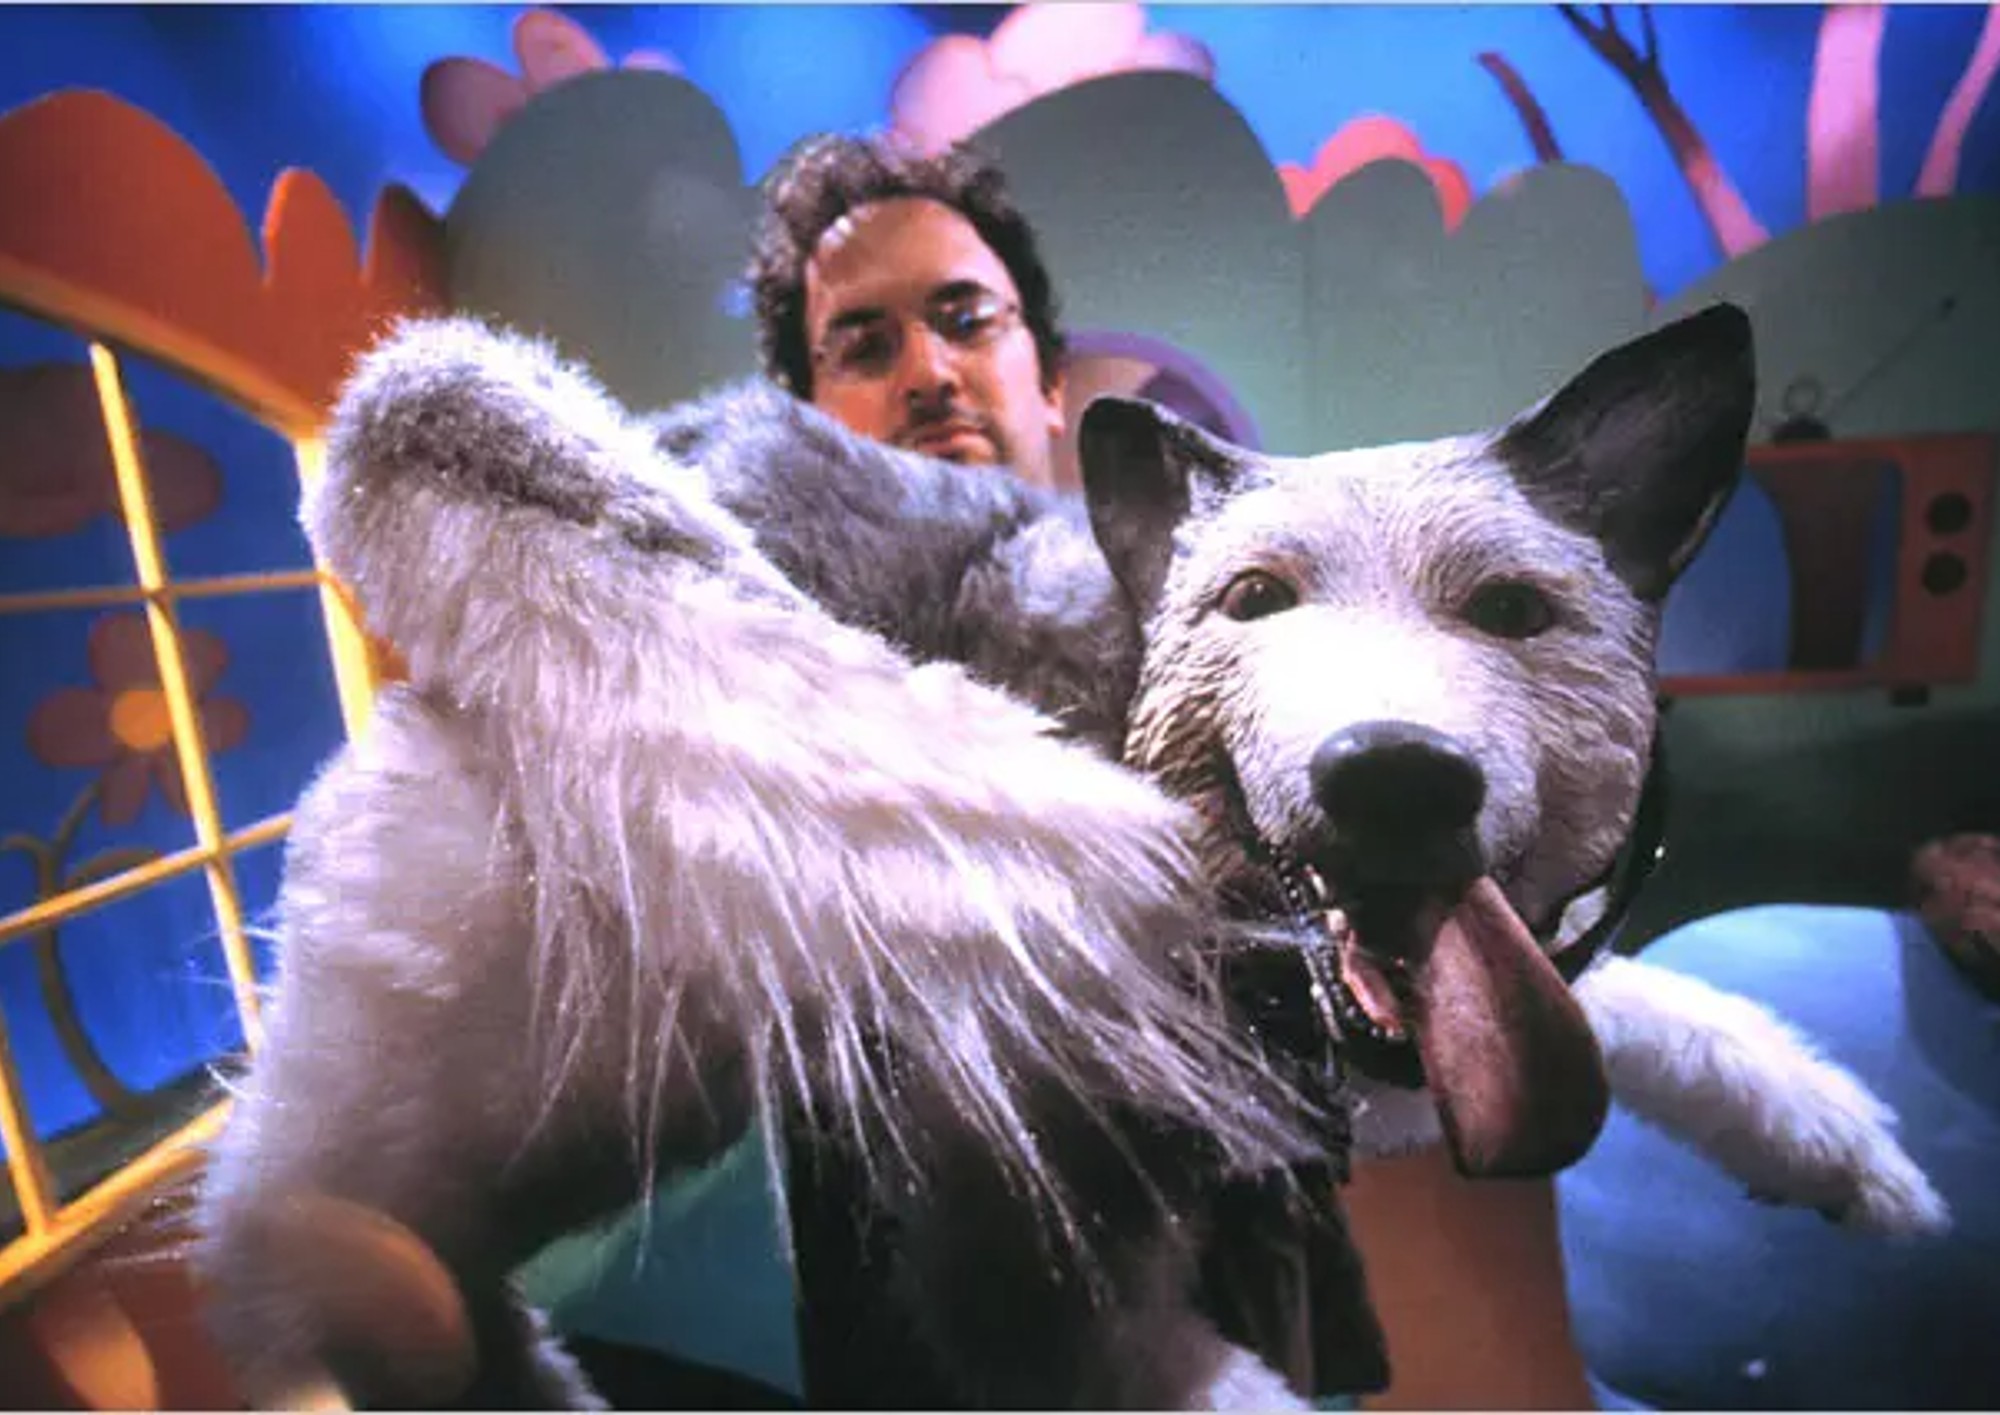 Image of comedian Robert Smigel with dog puppet